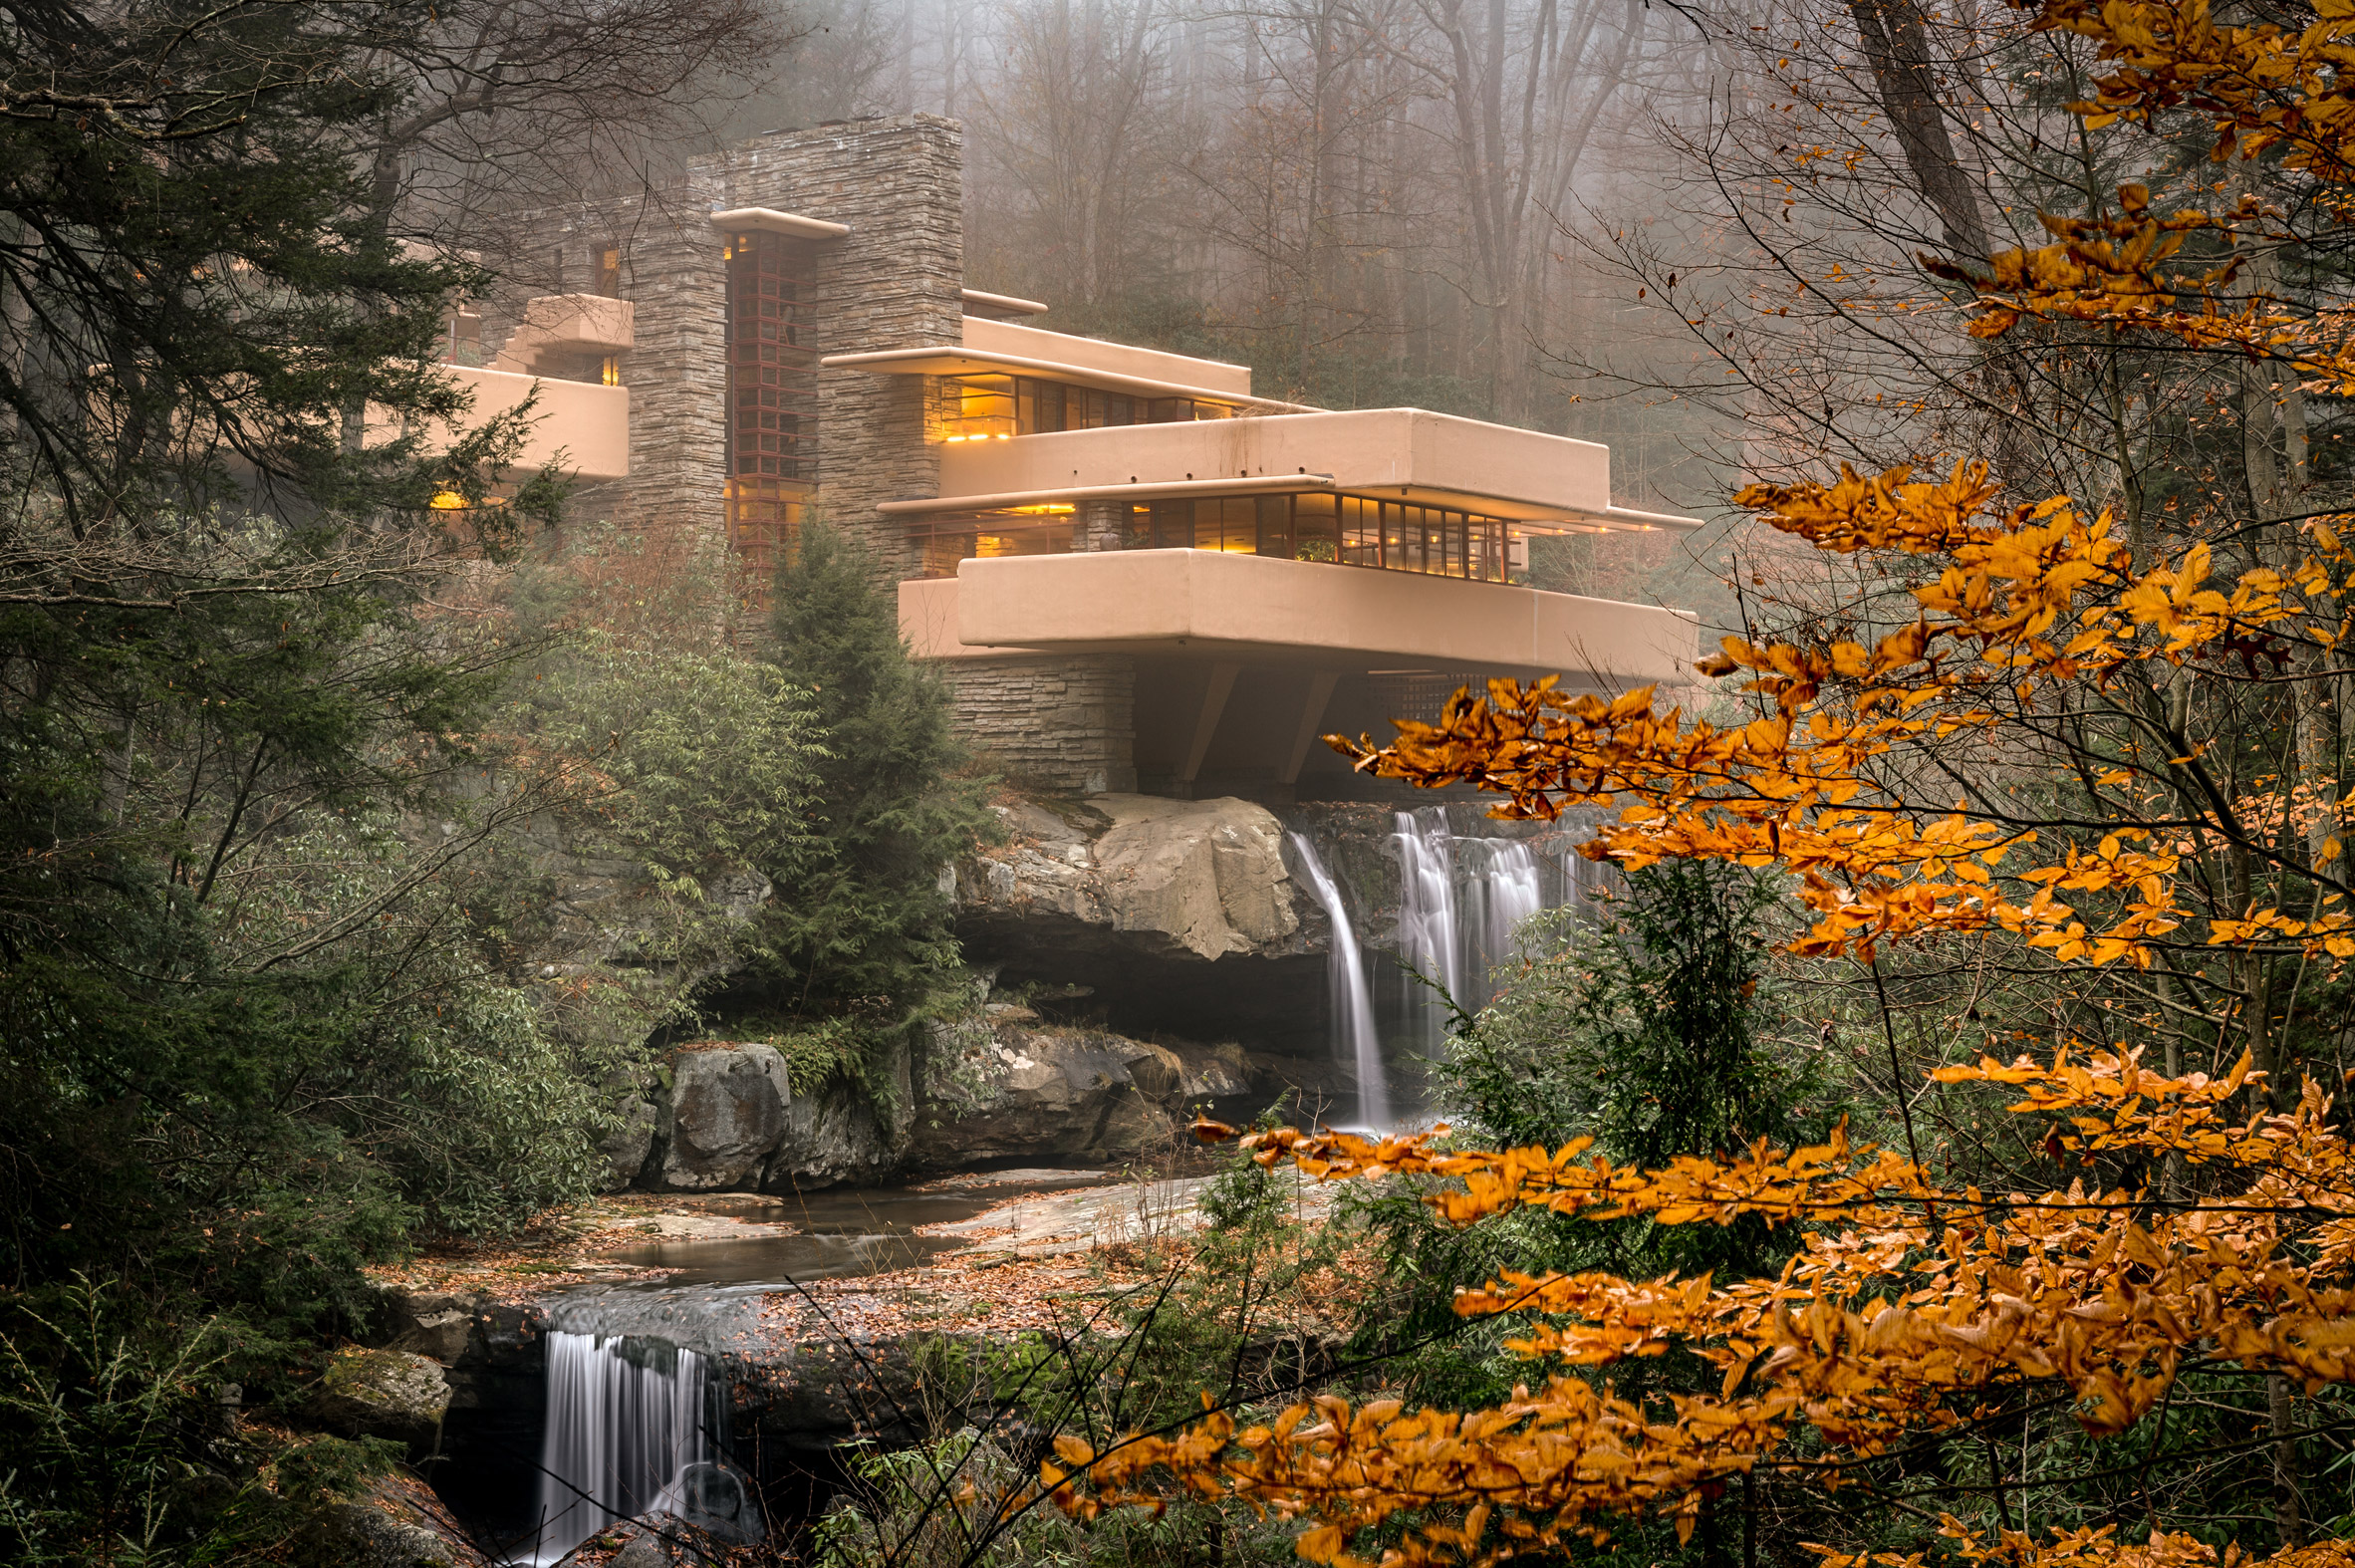 Frank Lloyd Wright's lesser-known designs are captured in new images-21